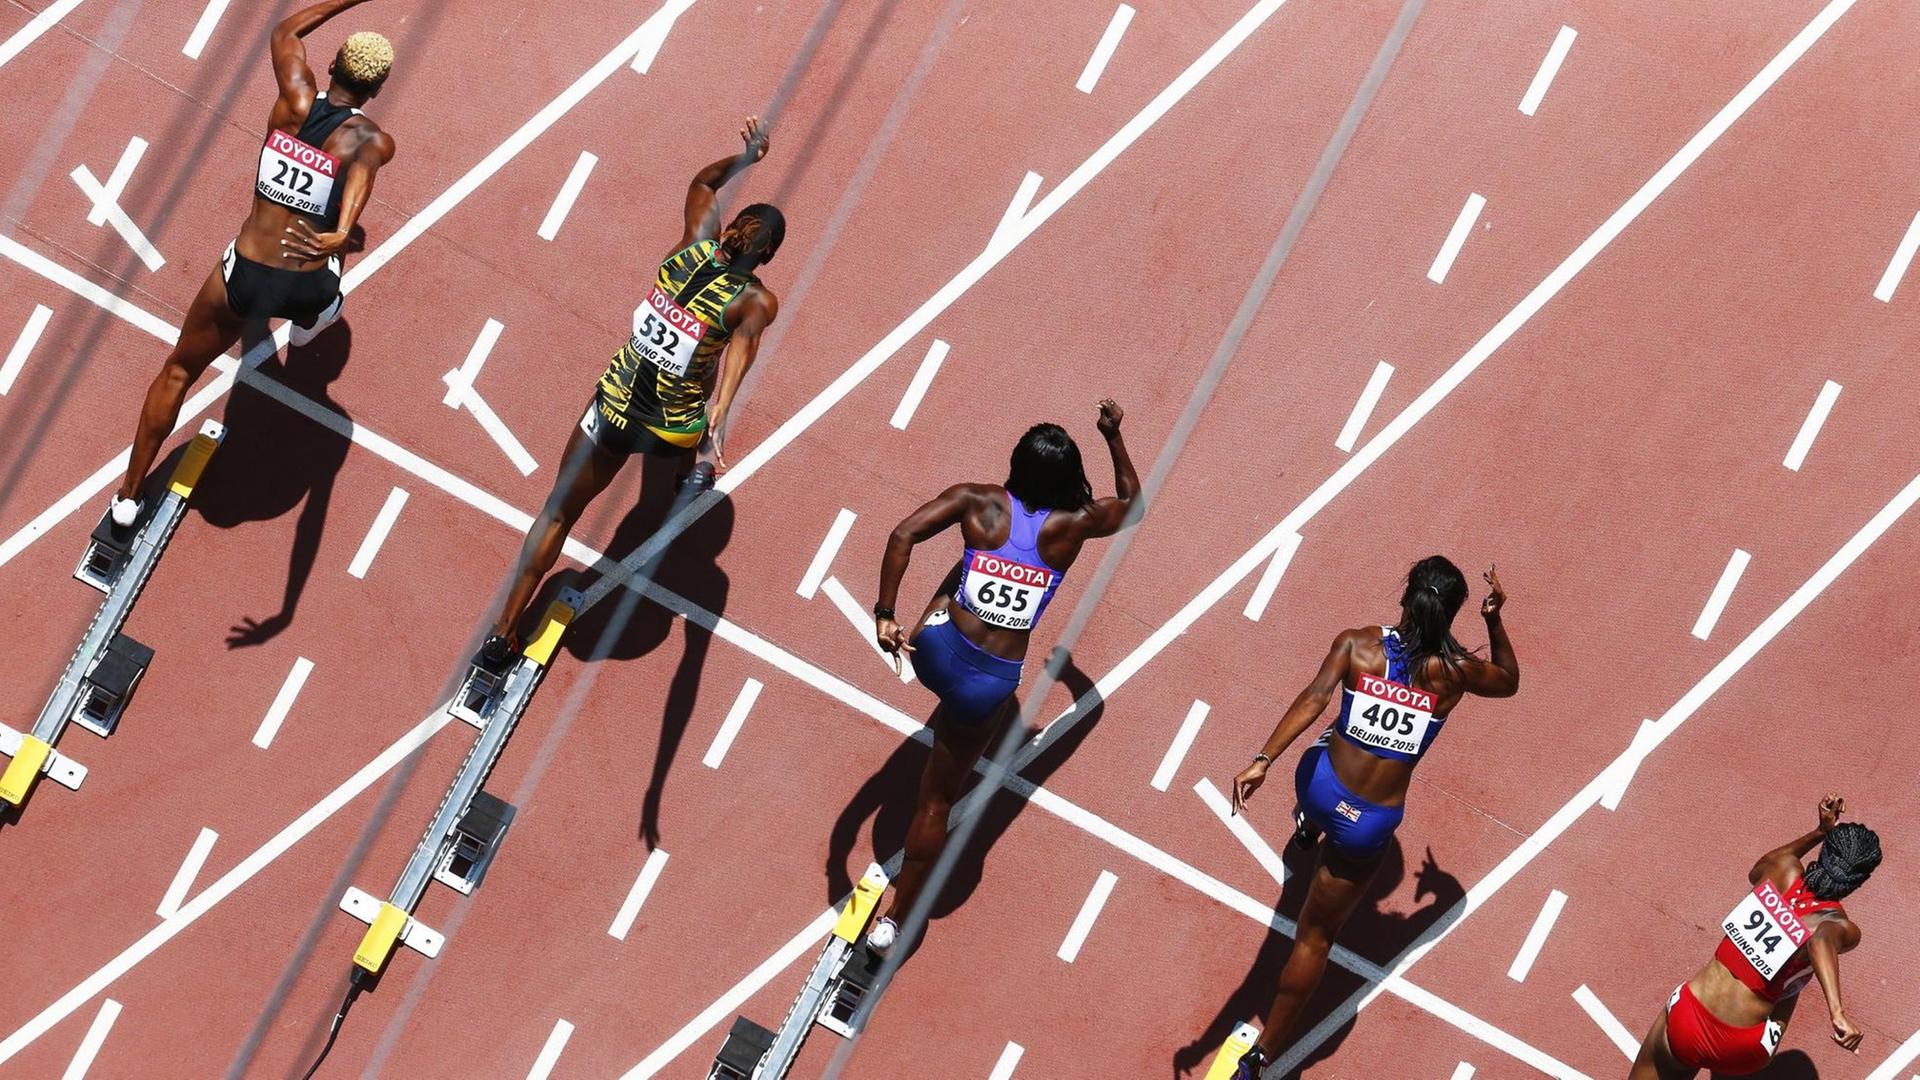 epa04899789 Competitors at the start of heat 7 in the women's 100m Hurdles heats during the Beijing 2015 IAAF World Championships at the National Stadium, also known as Bird's Nest, in Beijing, China, 27 August 2015. EPA/DIEGO AZUBEL |